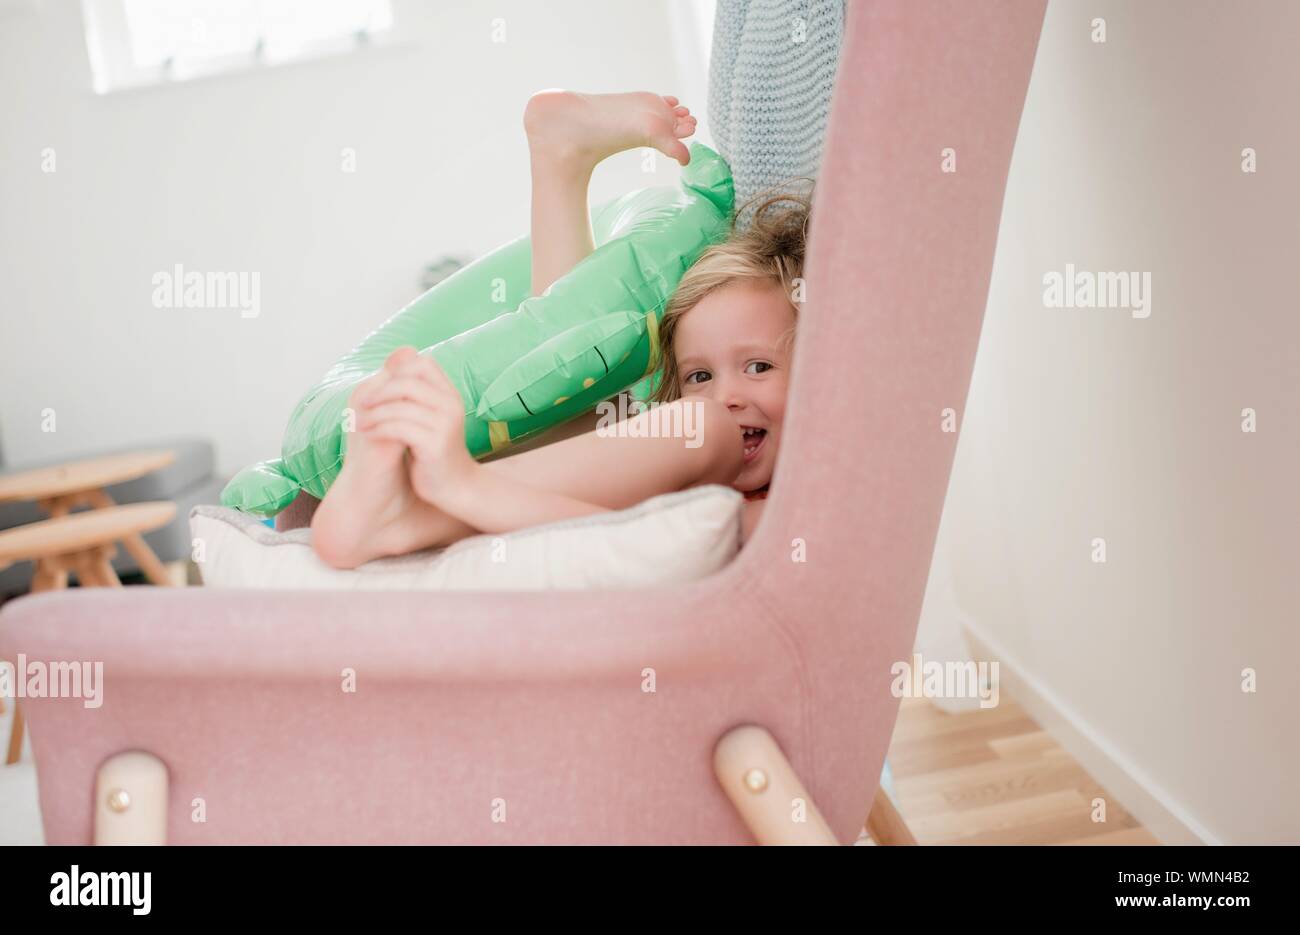 young girl sitting in a chair at home laughing playing with toys Stock Photo